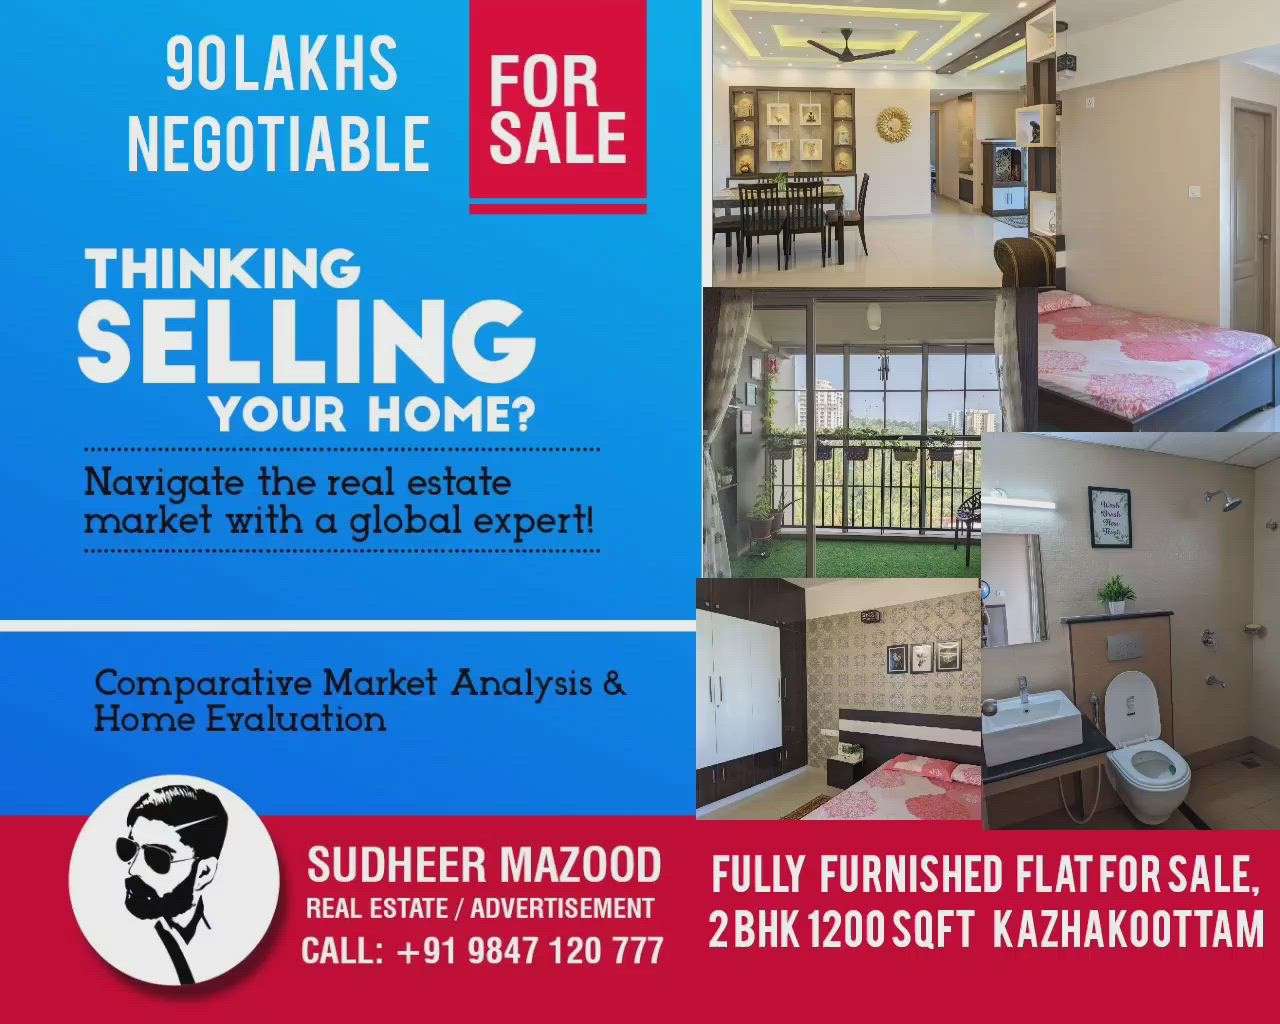 FOR SALE TRIVANDRUM KAZHAKOOTTAM Apartment 1200 Sqft. 2 Bed Attached . Fully Furnished with Luxury Amenities . Full length balcony Sea view. 11 th Floor . 

Price 90 Lakh Slightly negotiable 

Very close to lullu mall , 
Tecknopark Campus , Ust Global Campus and infosys Campus . Ideal property for rental investment . 

Amenities -
Multi Gymnasium, Swimming pool, Children's play area, Multipurpose Room , Party hall . 24 × 7 Security, Power Backup , Landscaped Garden ,  24/7 security and Car parking.

Walkable distance from National Highway. And opposite to upcoming Tauras Mall


More Properties are available in My Facebook page, Please Search with your preferable location. Facebook  page: Sudheermazood Real Estate and Property Trivandrum.

CONTACT
9847120777

Bank Loan - 
I am also a bank loan consultant. If buyer is interest to buy this Property, i can provide loan through Banks like Sbi , Hdfc , Canara Bank , Idbi Bank etc .

#trivandram #realtors #nriloan #realestate #dubai